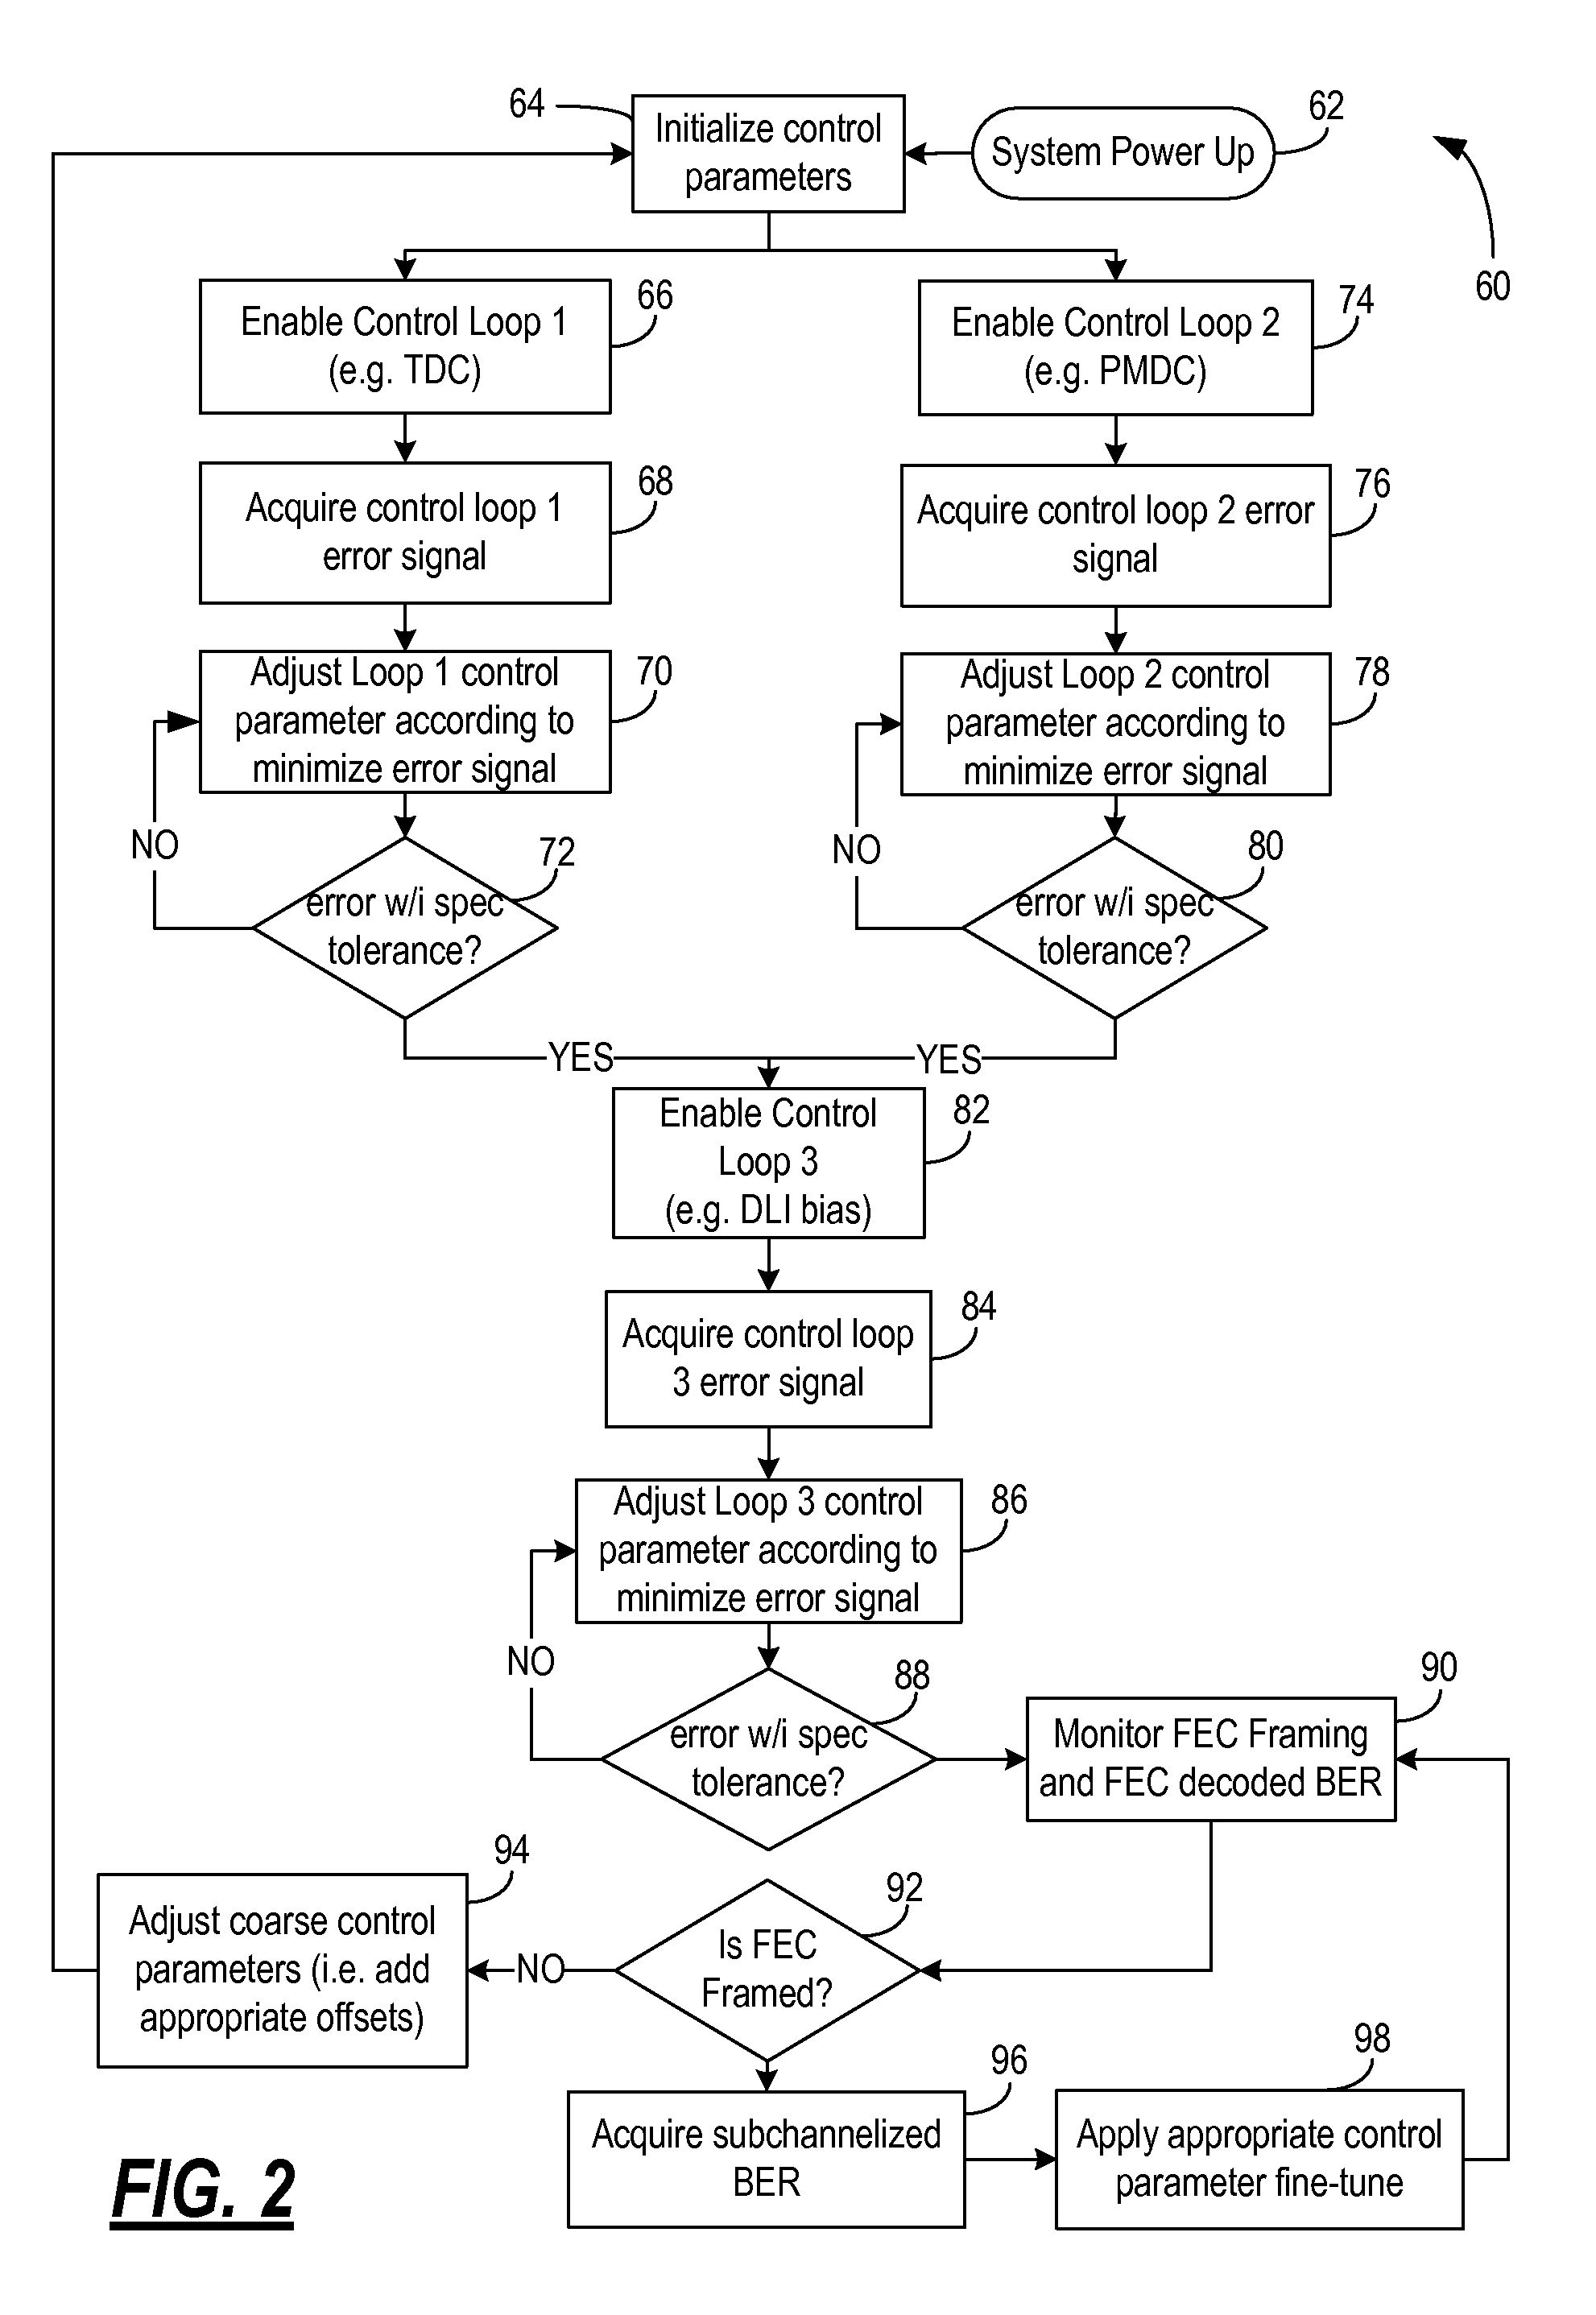 Systems and methods for communication system control utilizing corrected forward error correction error location identifiers